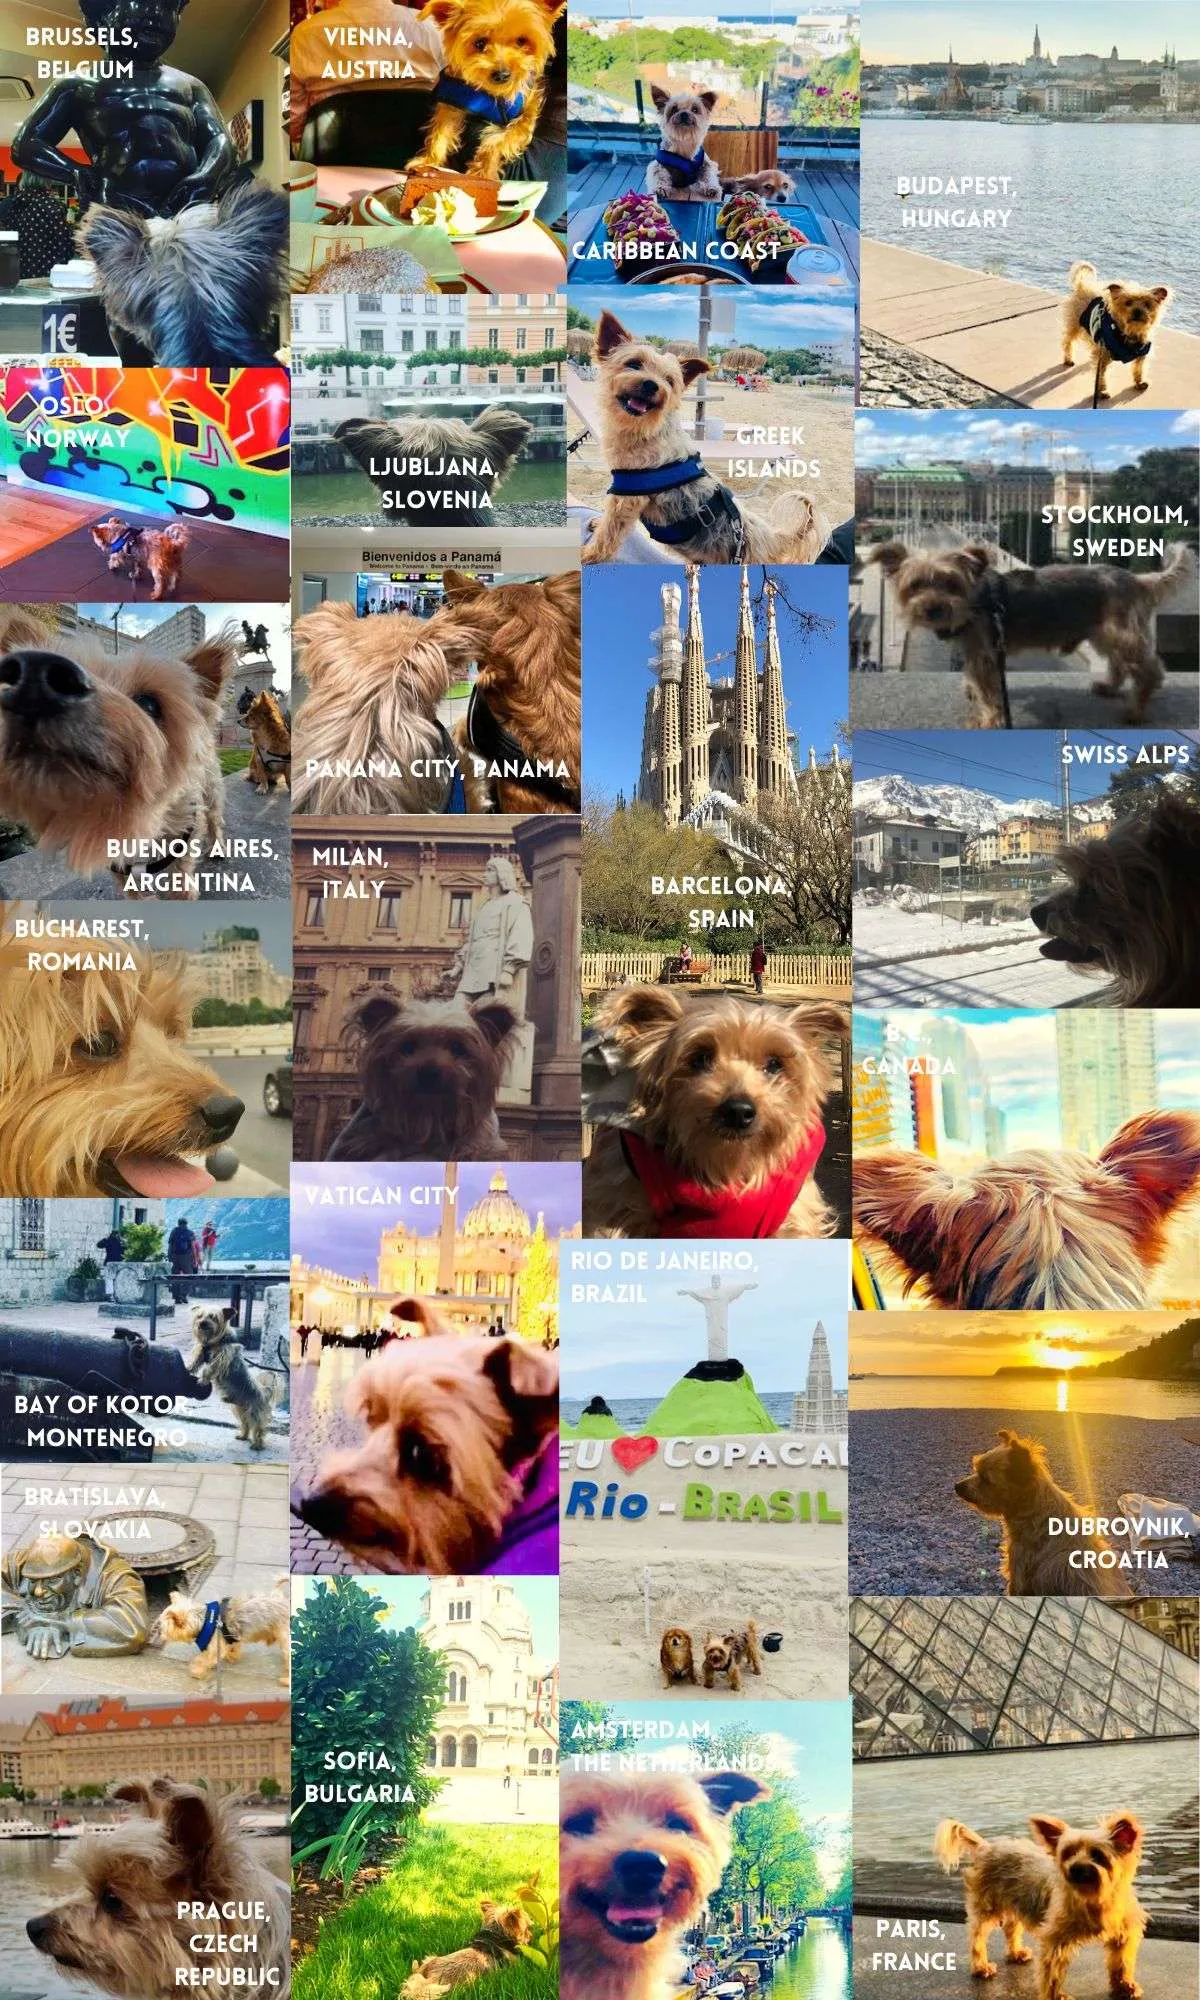 the travels of roger wellington the world-traveling yorkie